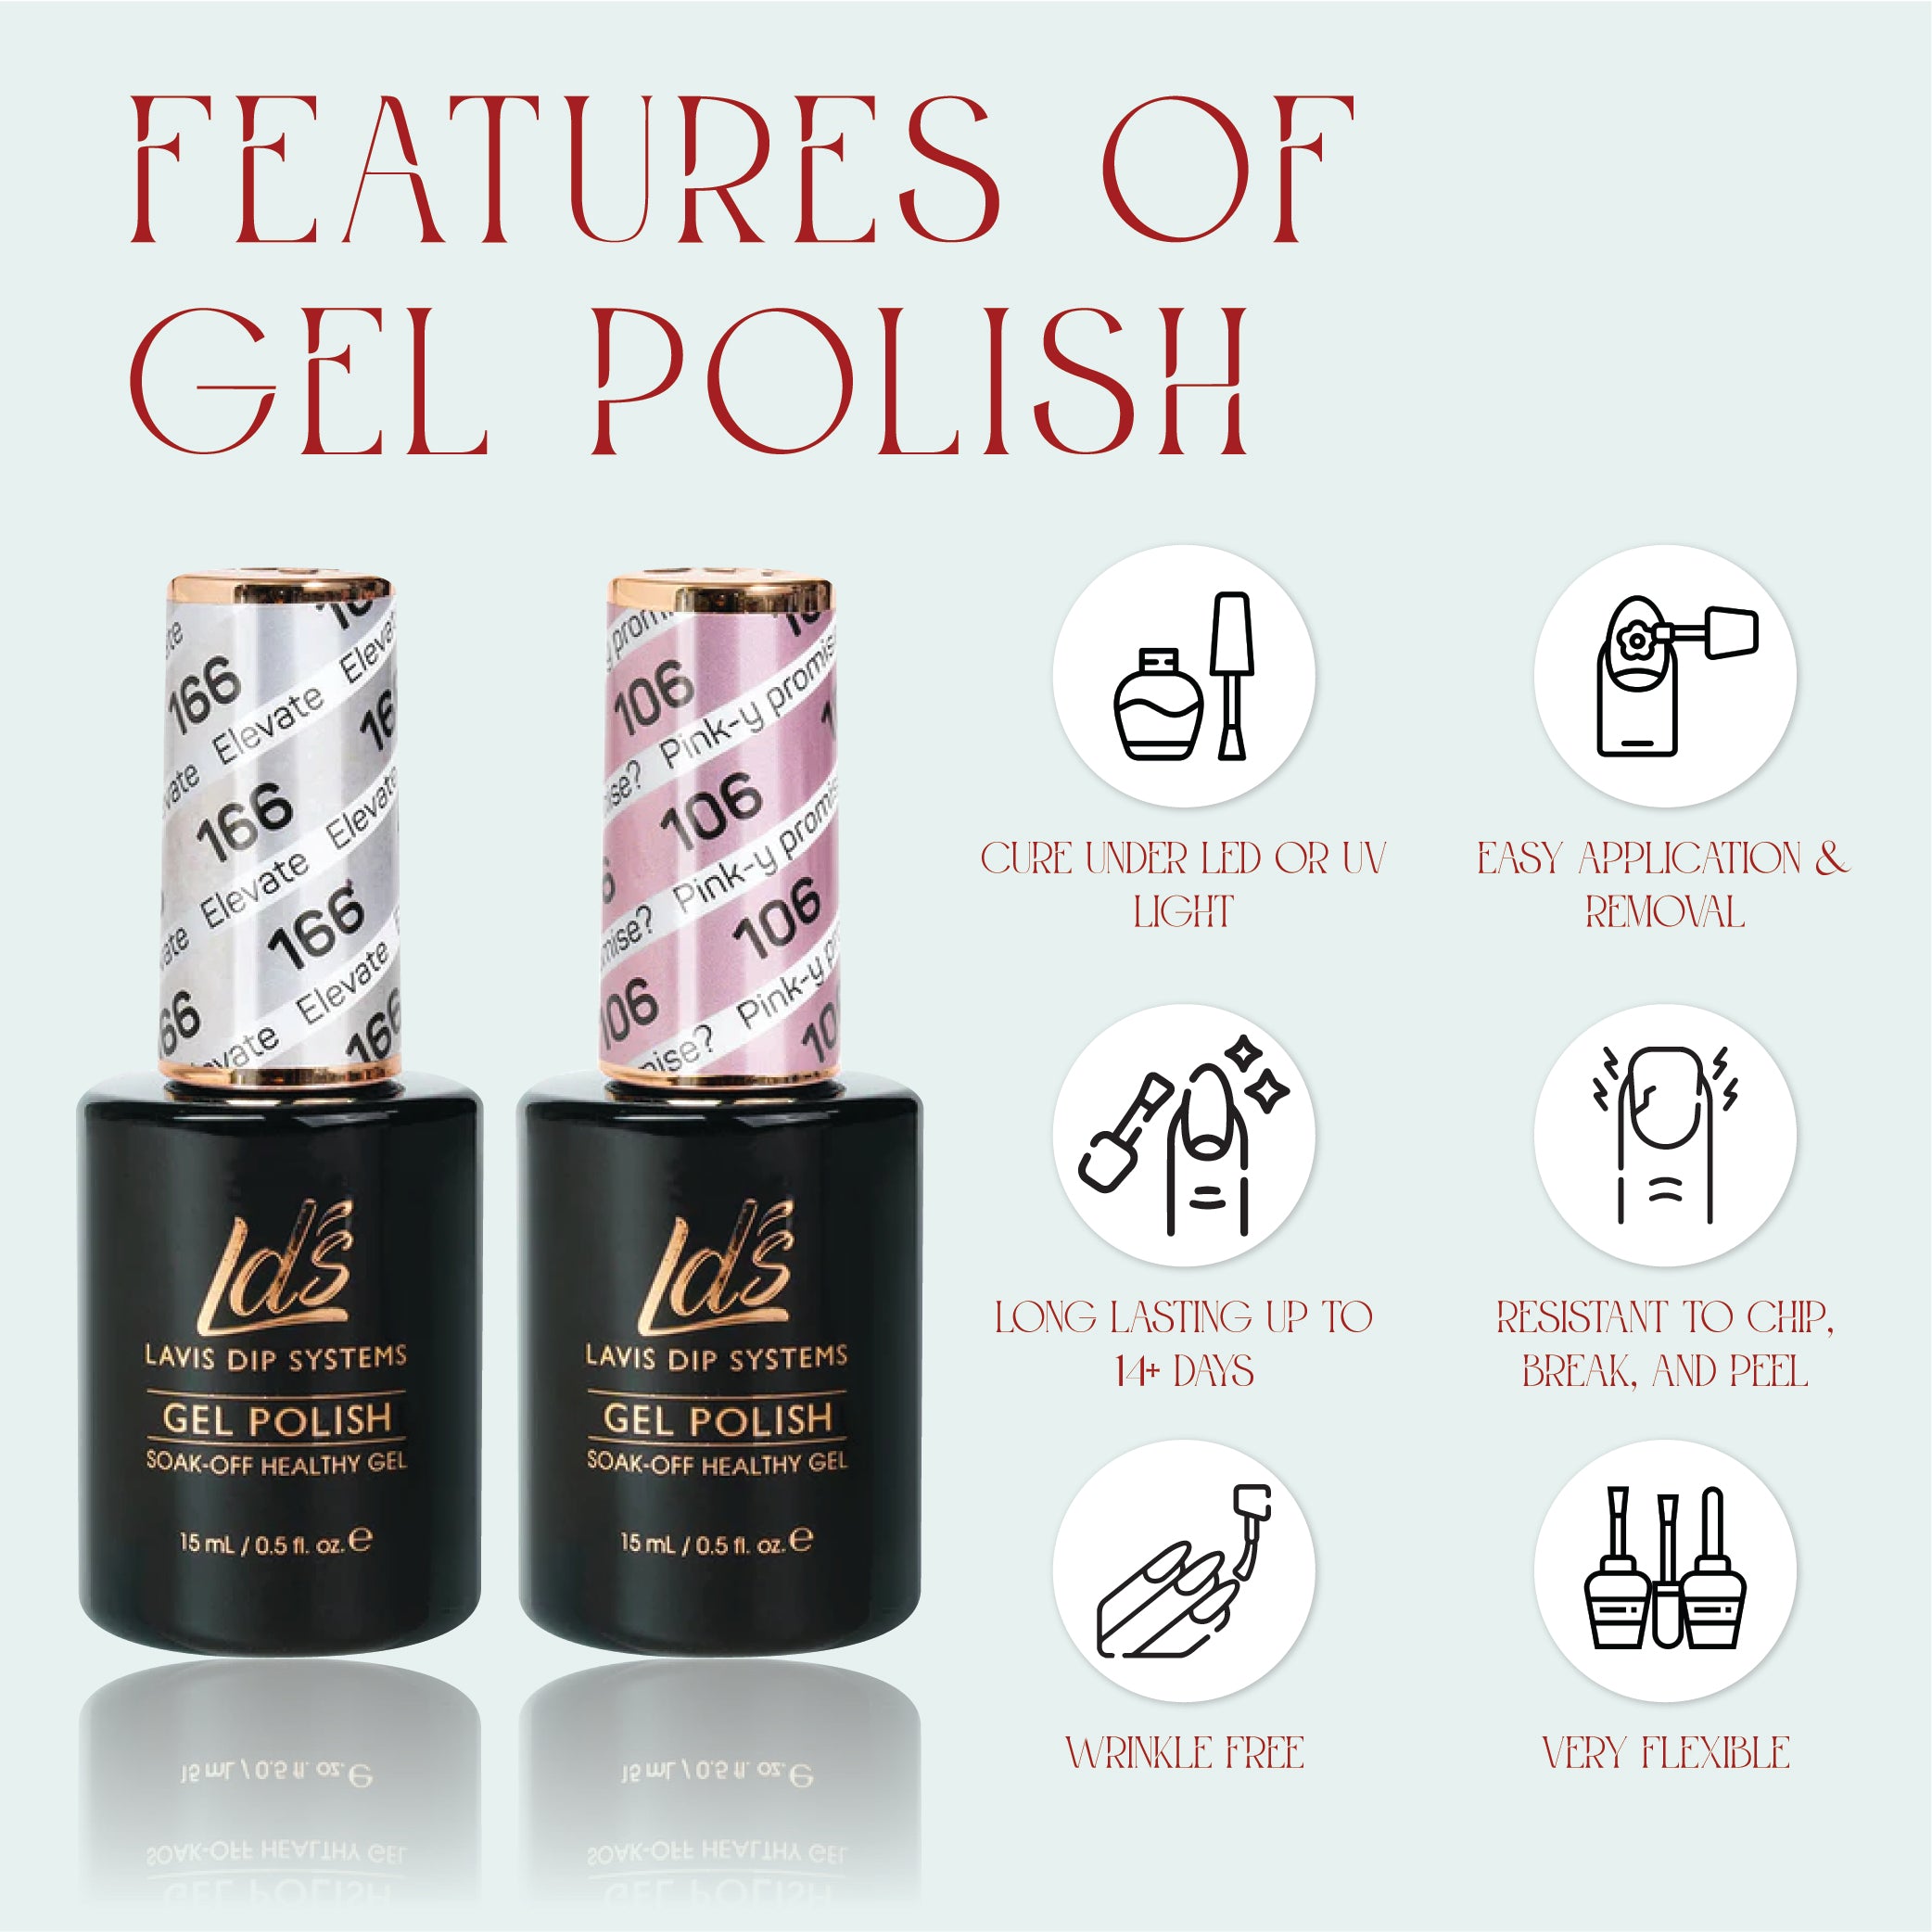 LDS 080 You Melt Me - LDS Healthy Gel Polish & Matching Nail Lacquer Duo Set - 0.5oz